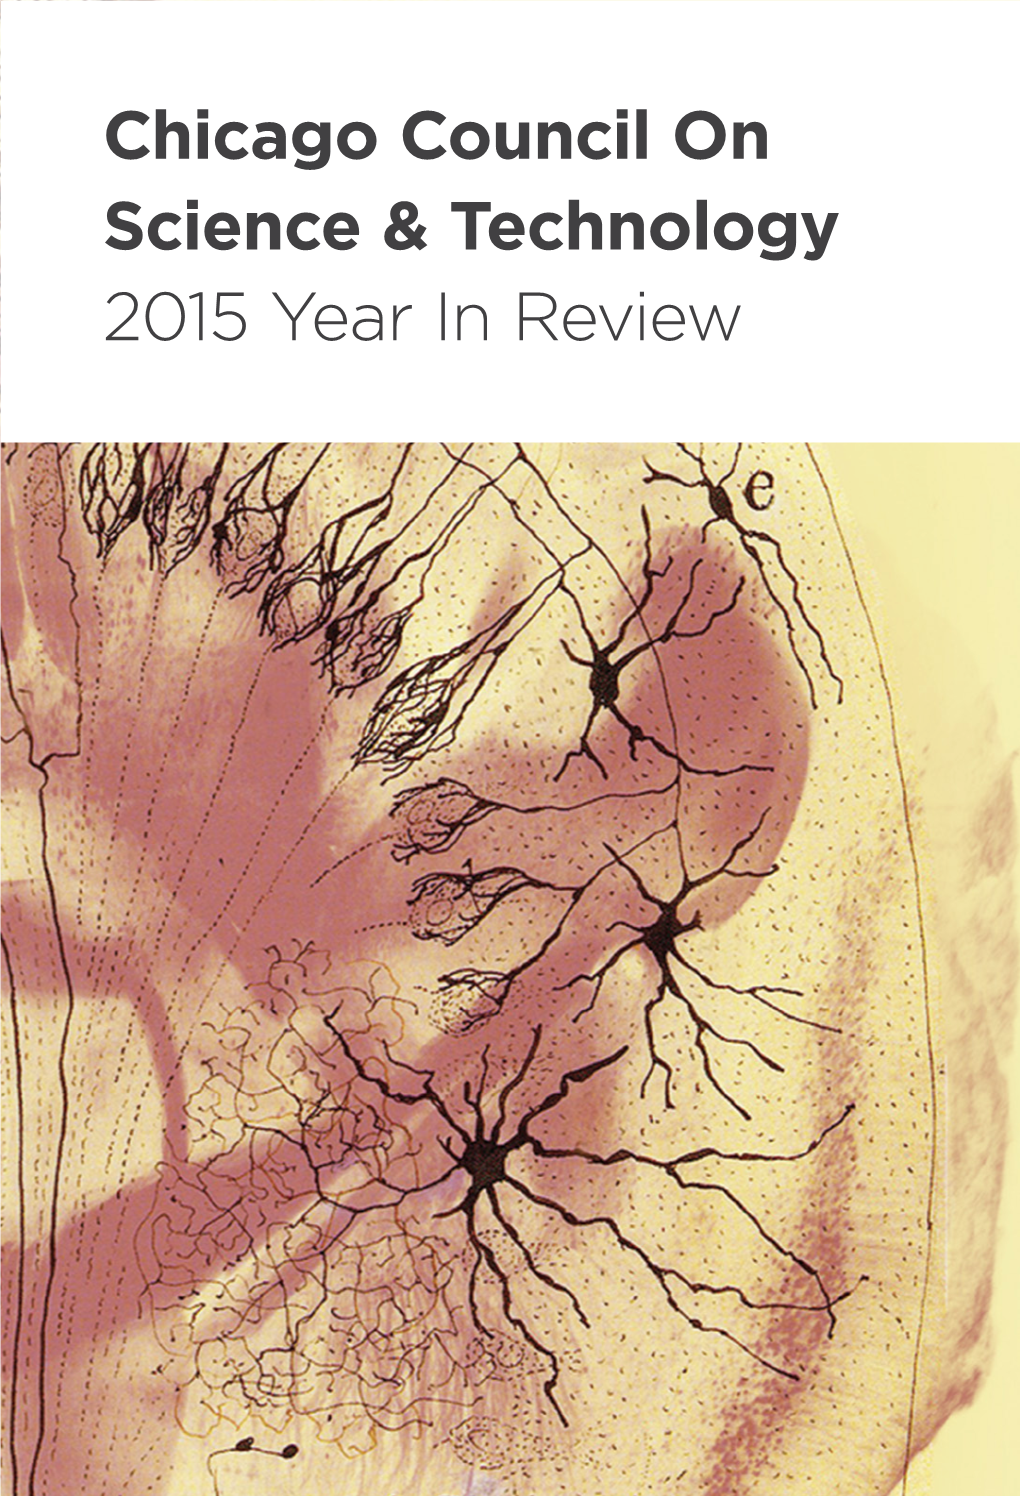 Chicago Council on Science & Technology 2015 Year in Review